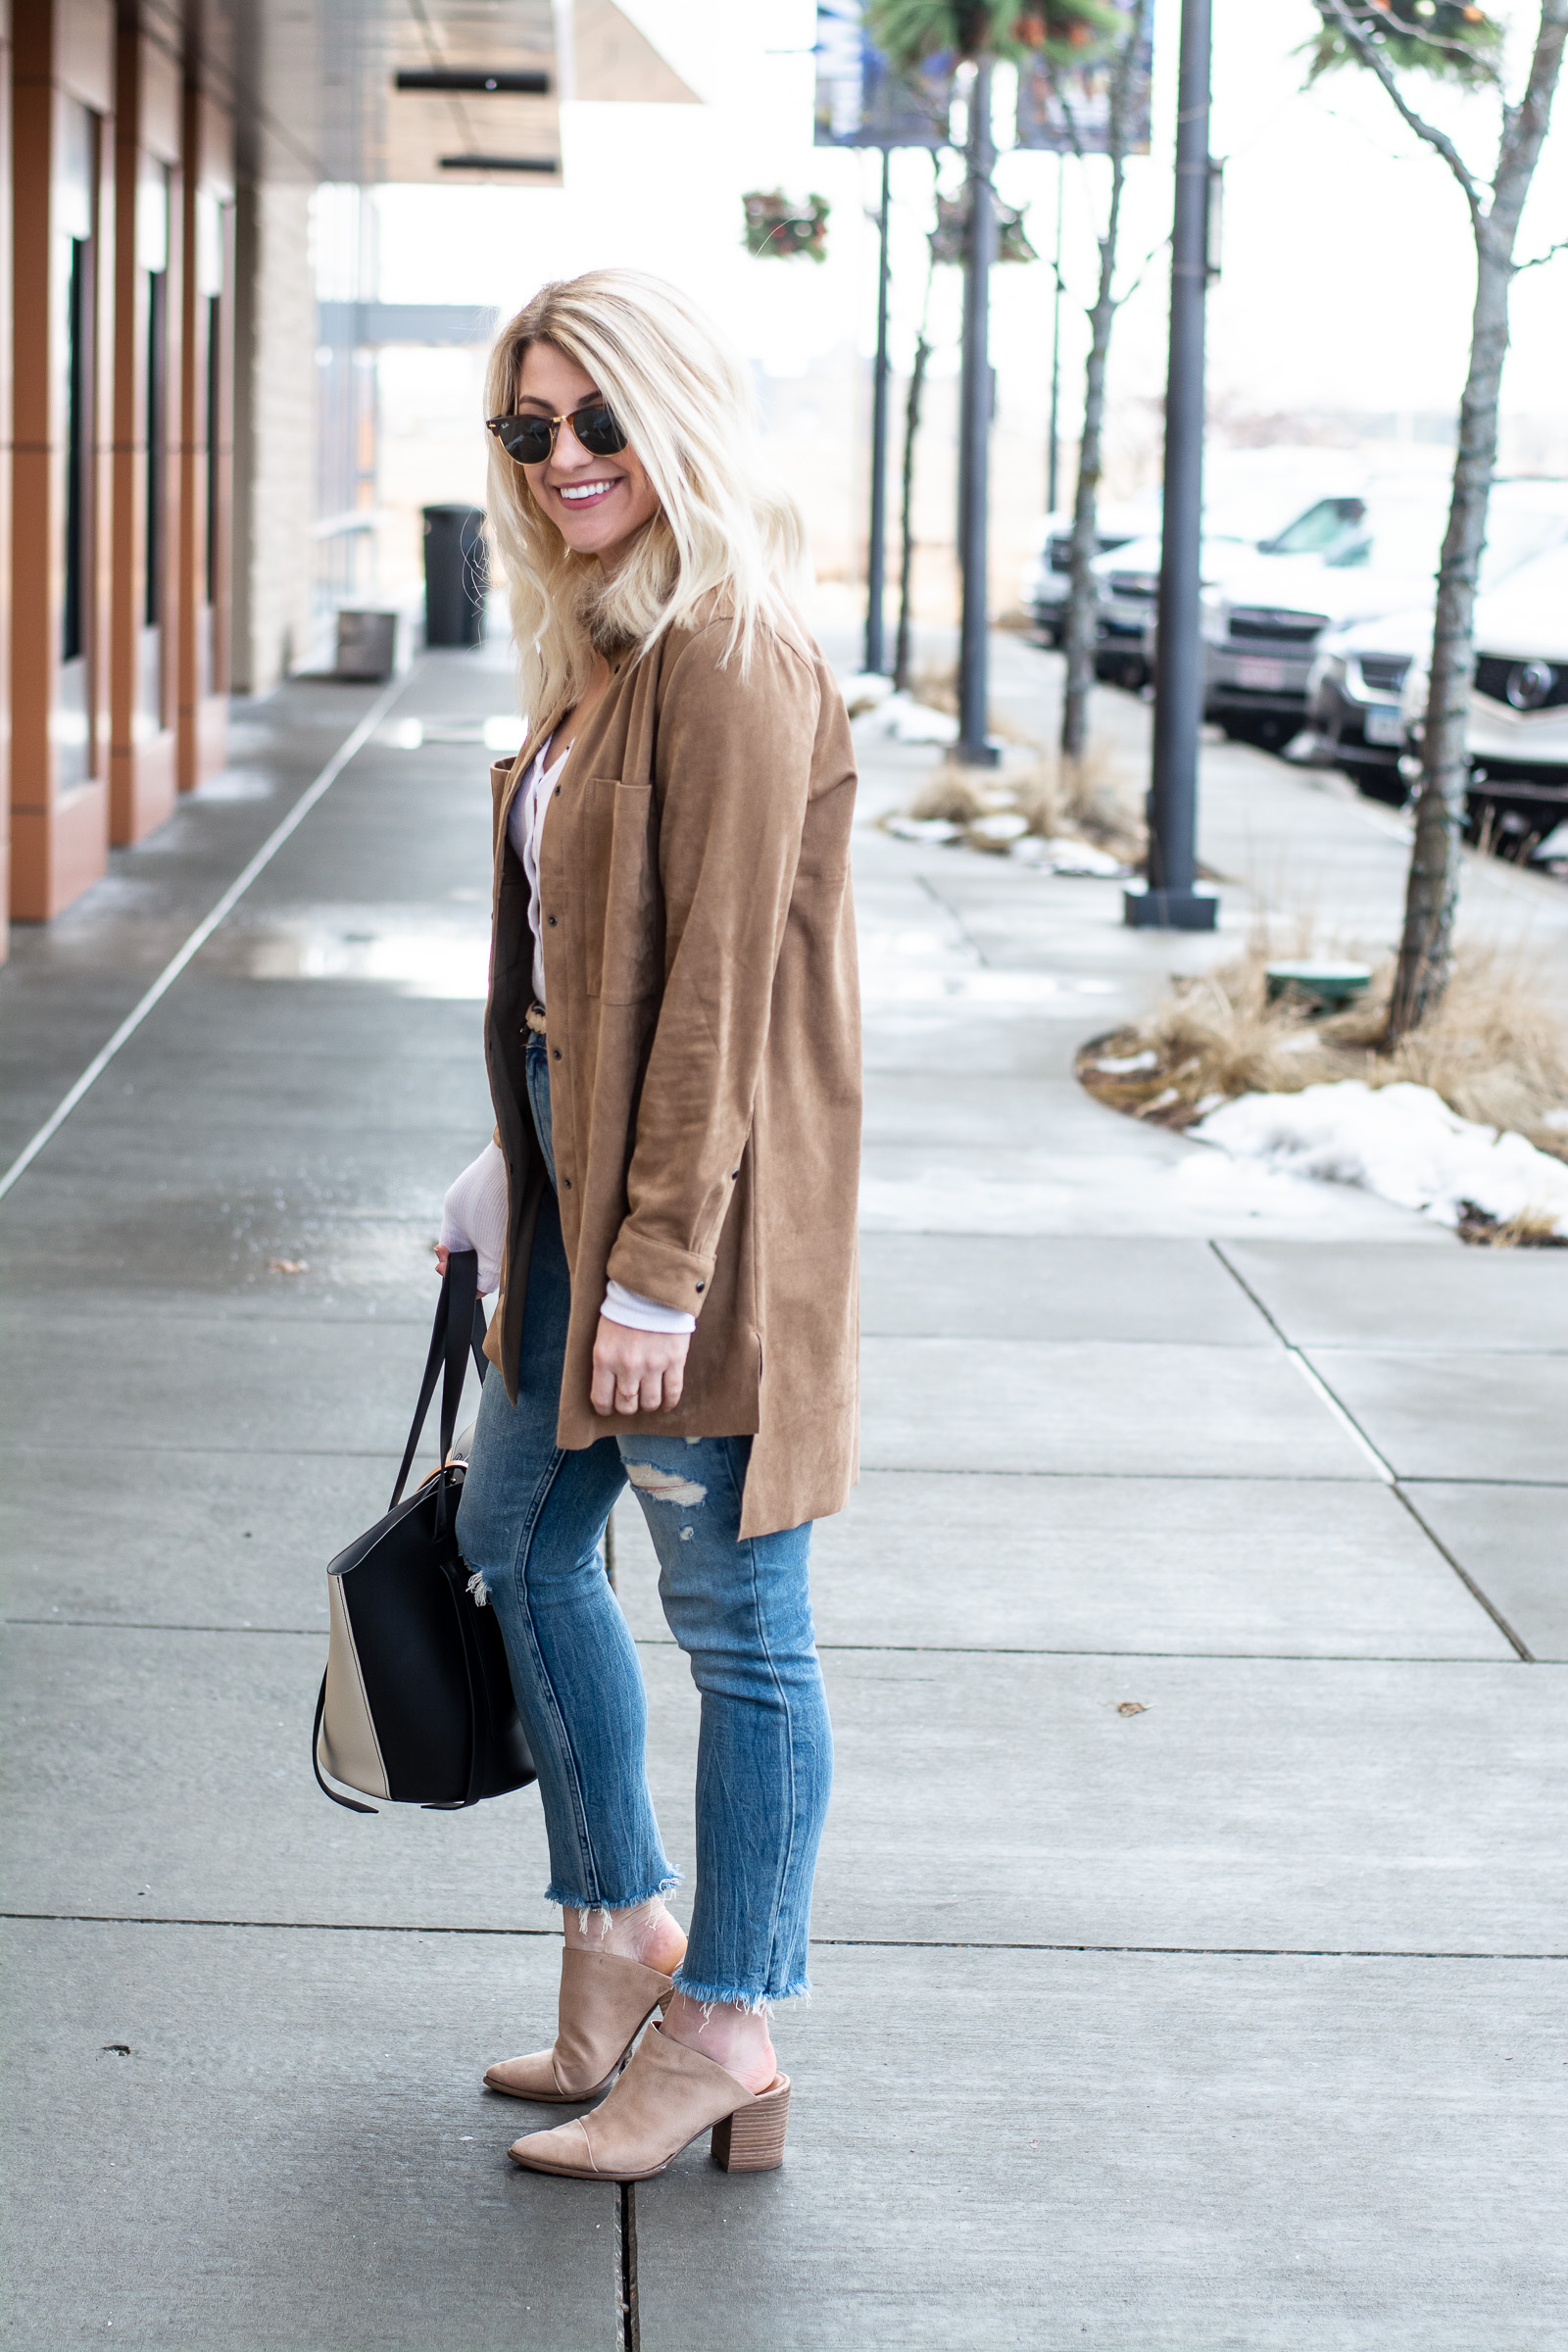 A Dress as a Jacket with Girlfriend Jeans. | Ash from LSR